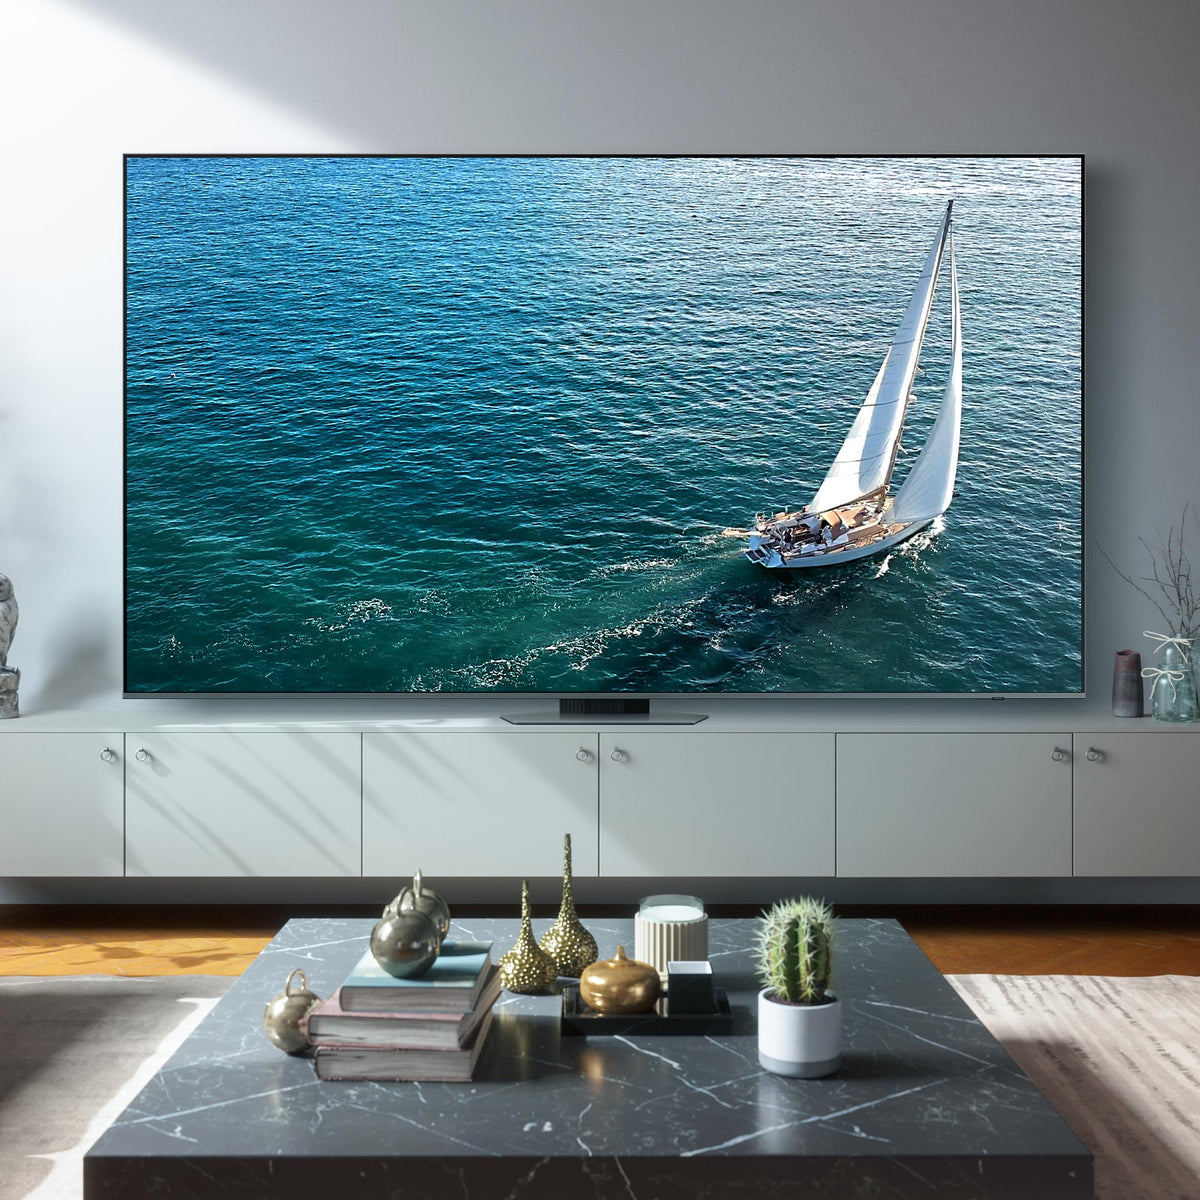 Samsung 98&quot; Q80C 4K HDR QLED Smart TV - Carbon Silver | QE98Q80CATXXU from Samsung - DID Electrical